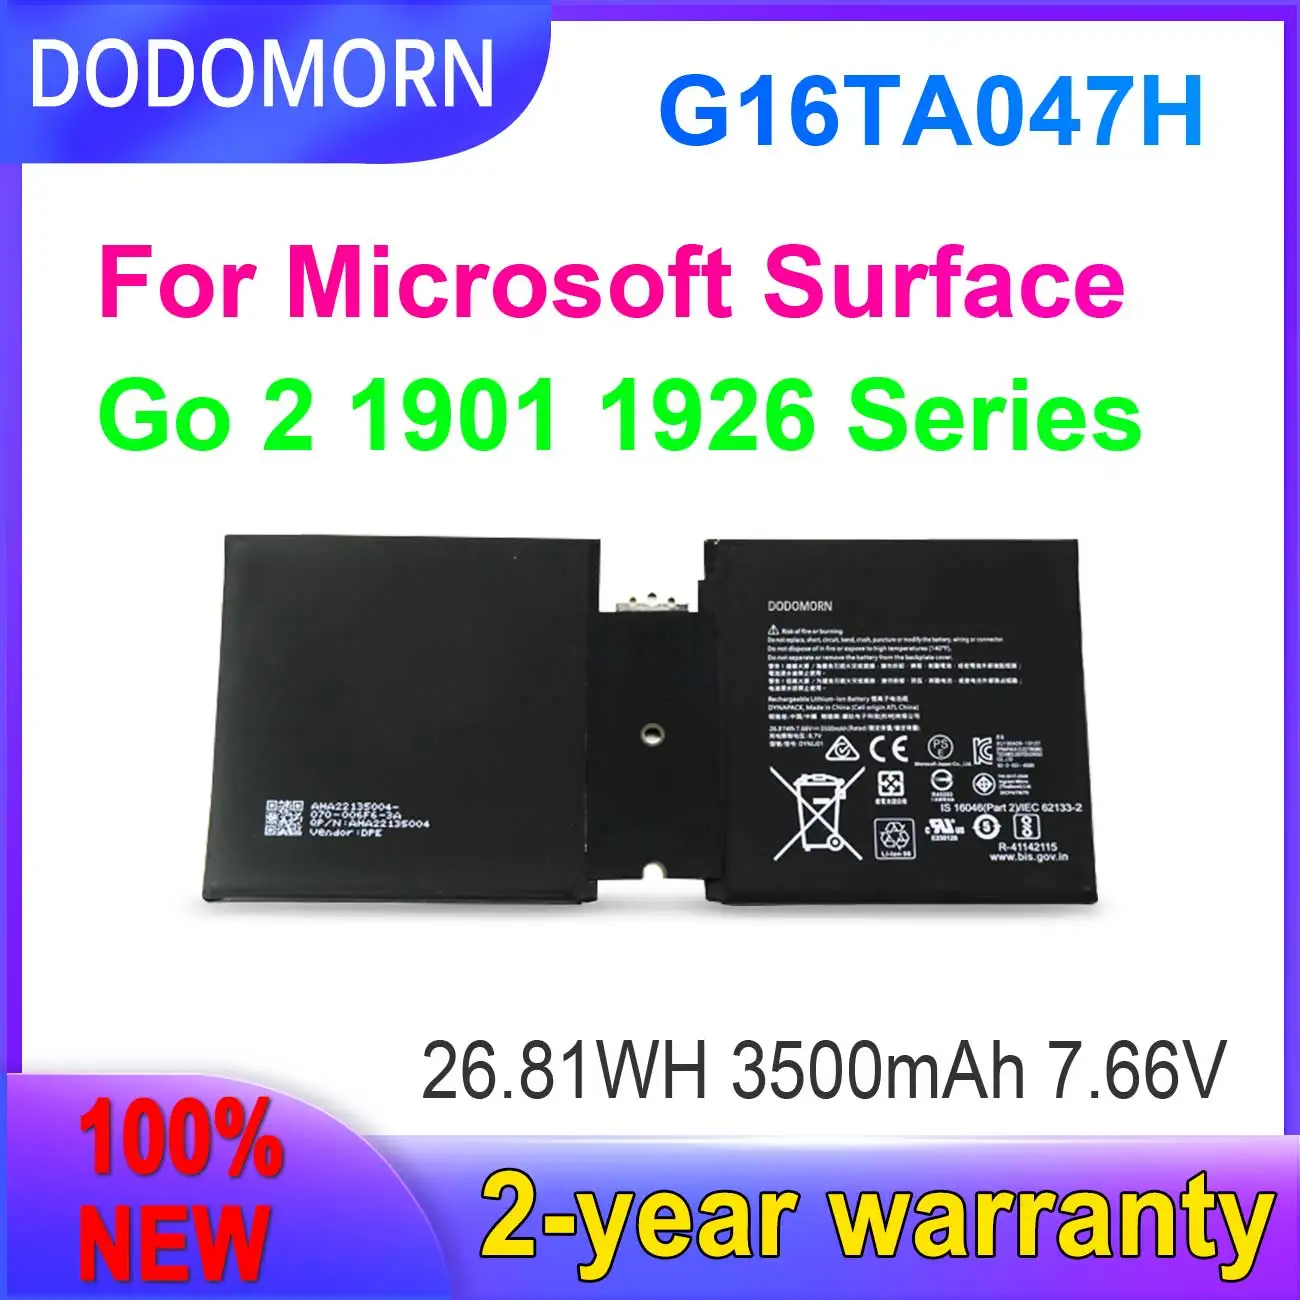 

DODOMORN New G16TA047H Battery For Microsoft Surface go 2 1901 1926 Series G16TA047H 7.6V 3500mAh Fast delivery